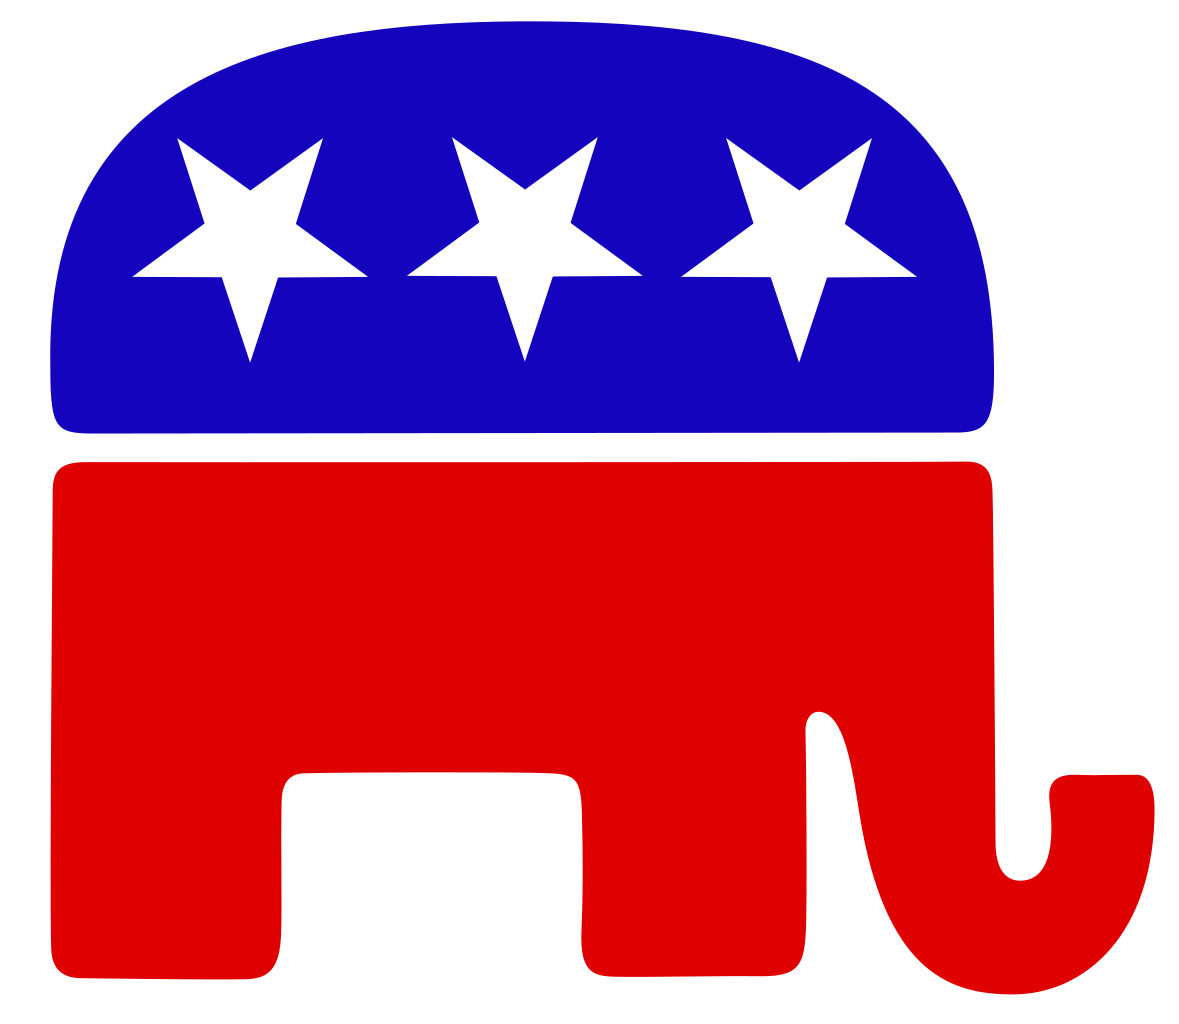 Primary elections 2022: State of the Idaho Republican Party